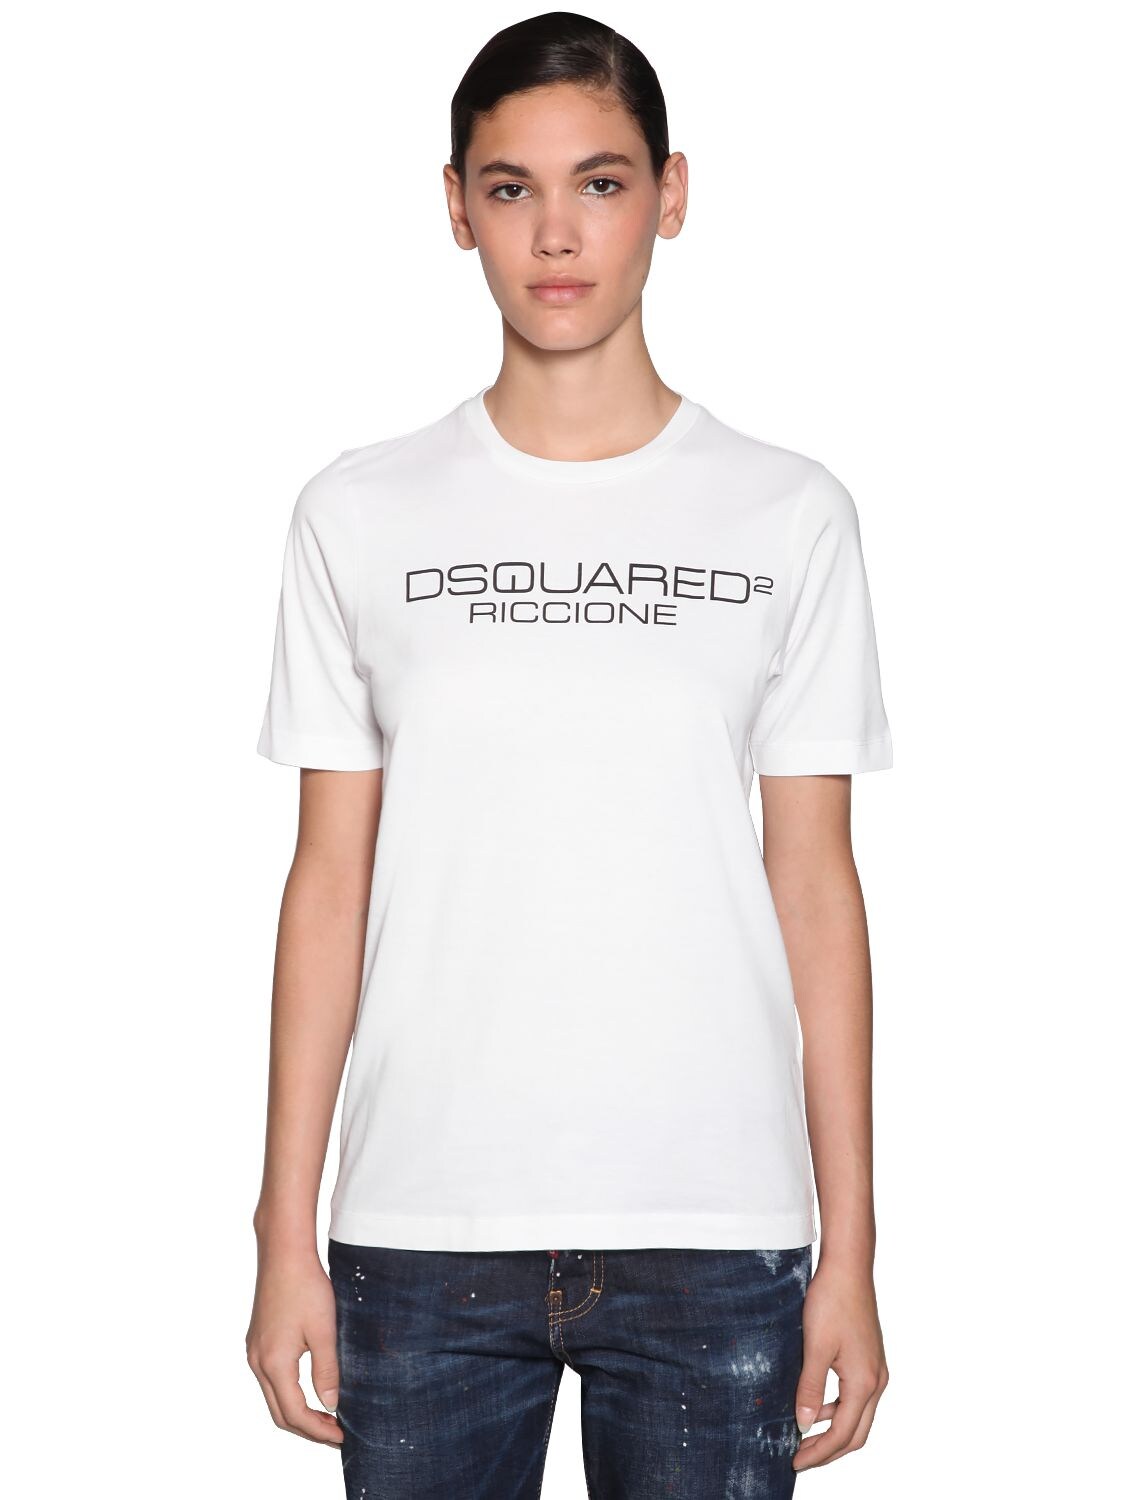 DSQUARED2 LOGO PRINTED COTTON JERSEY T-SHIRT,71I07Y035-MTAW0